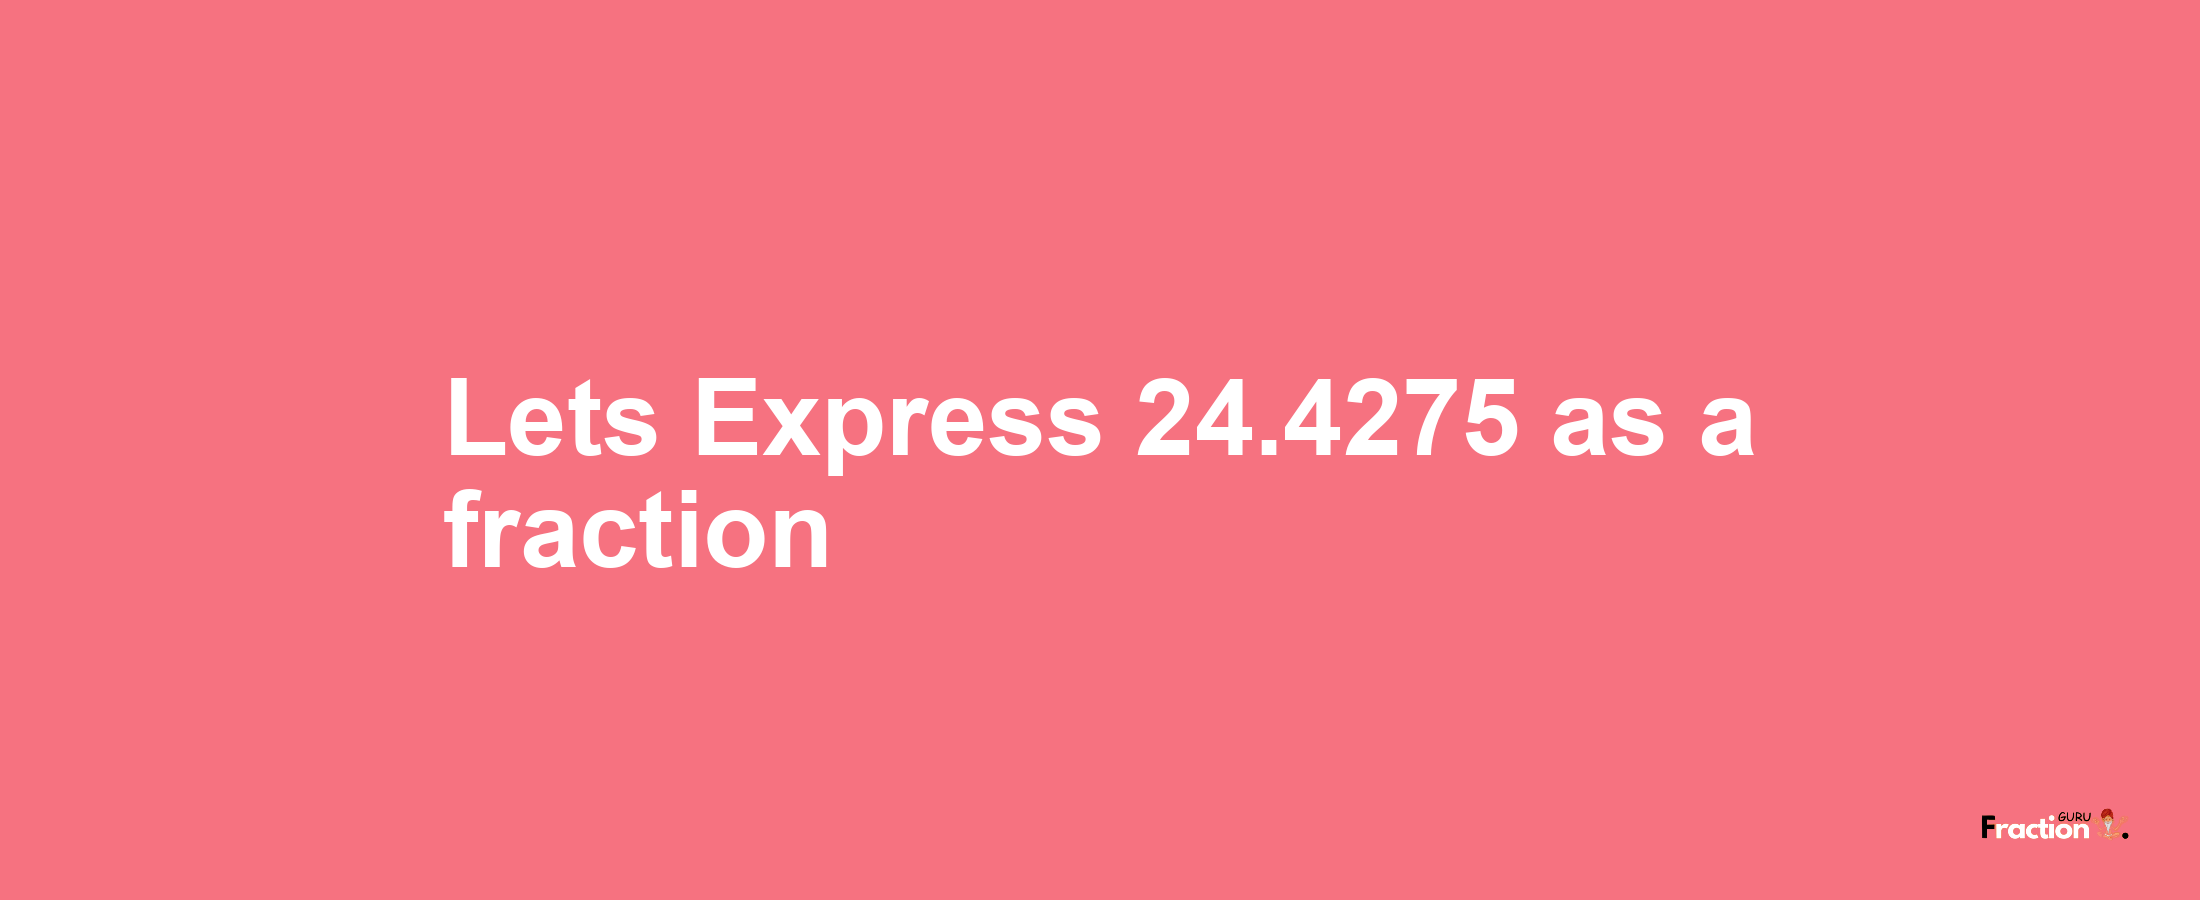 Lets Express 24.4275 as afraction